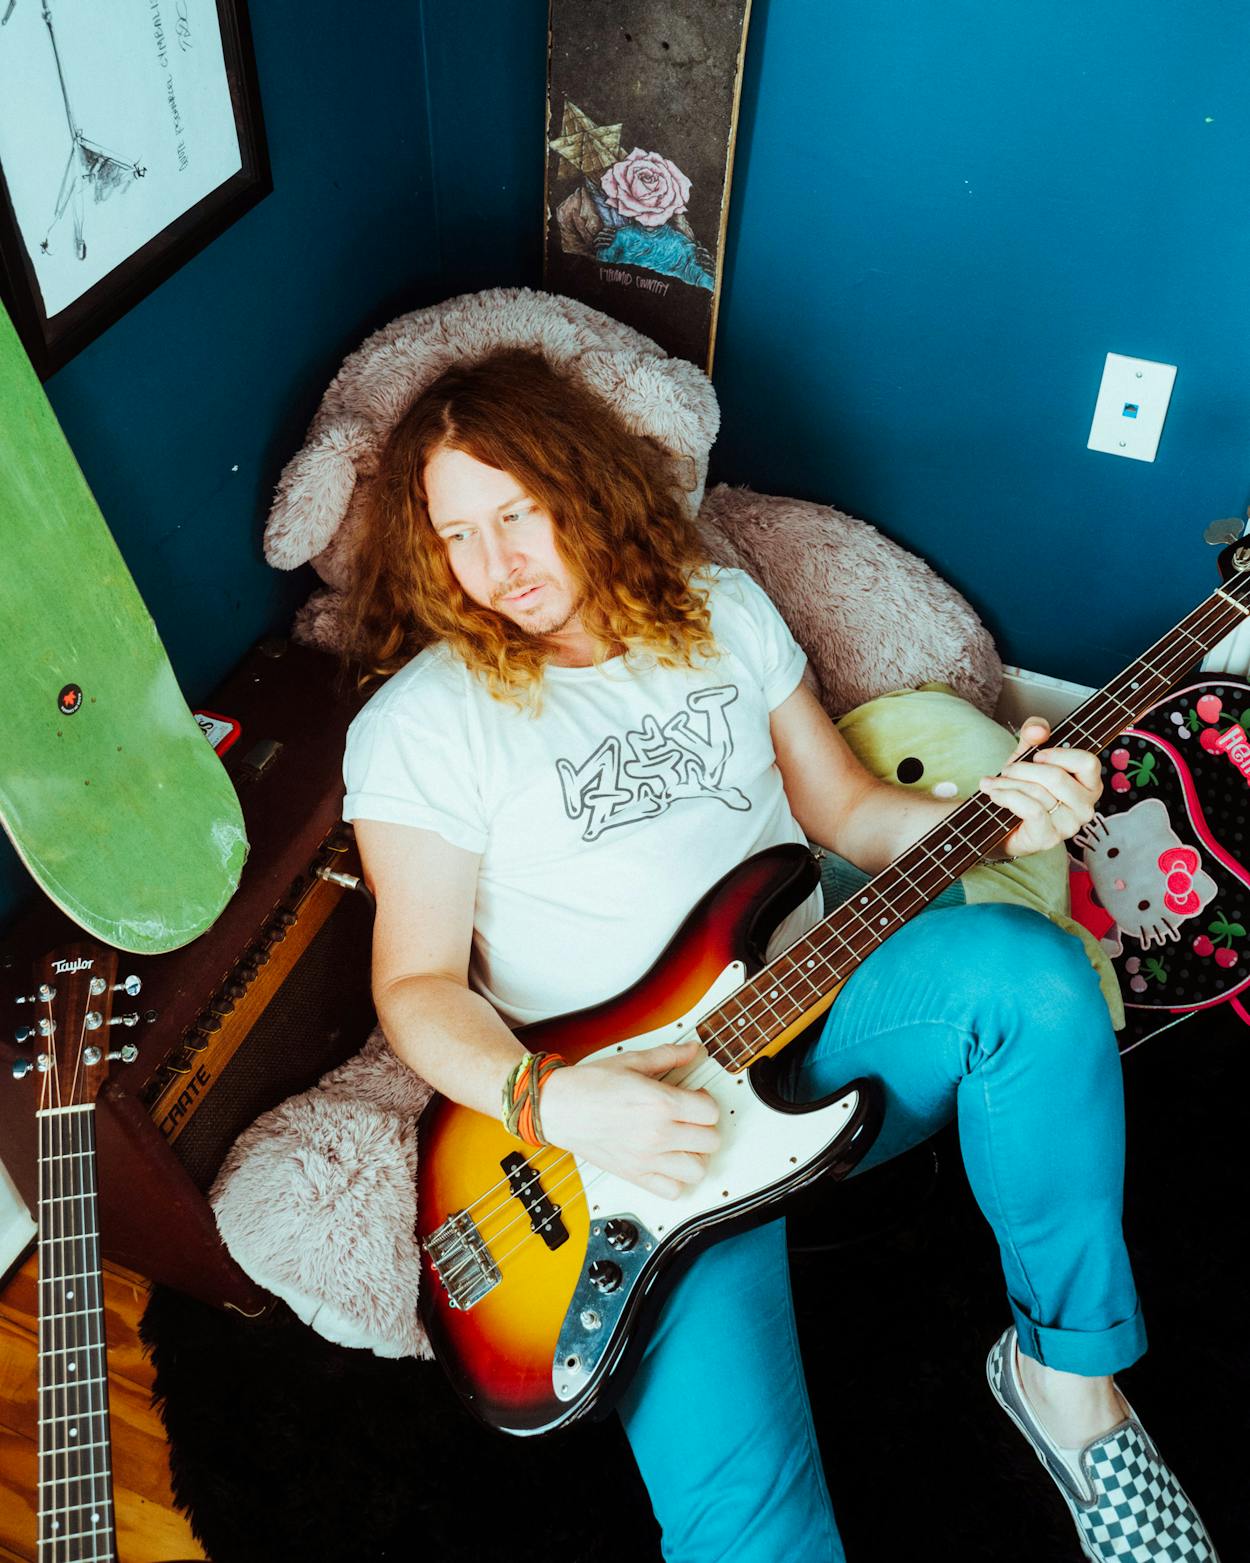 Ben Kweller Is Playing Through the Pain